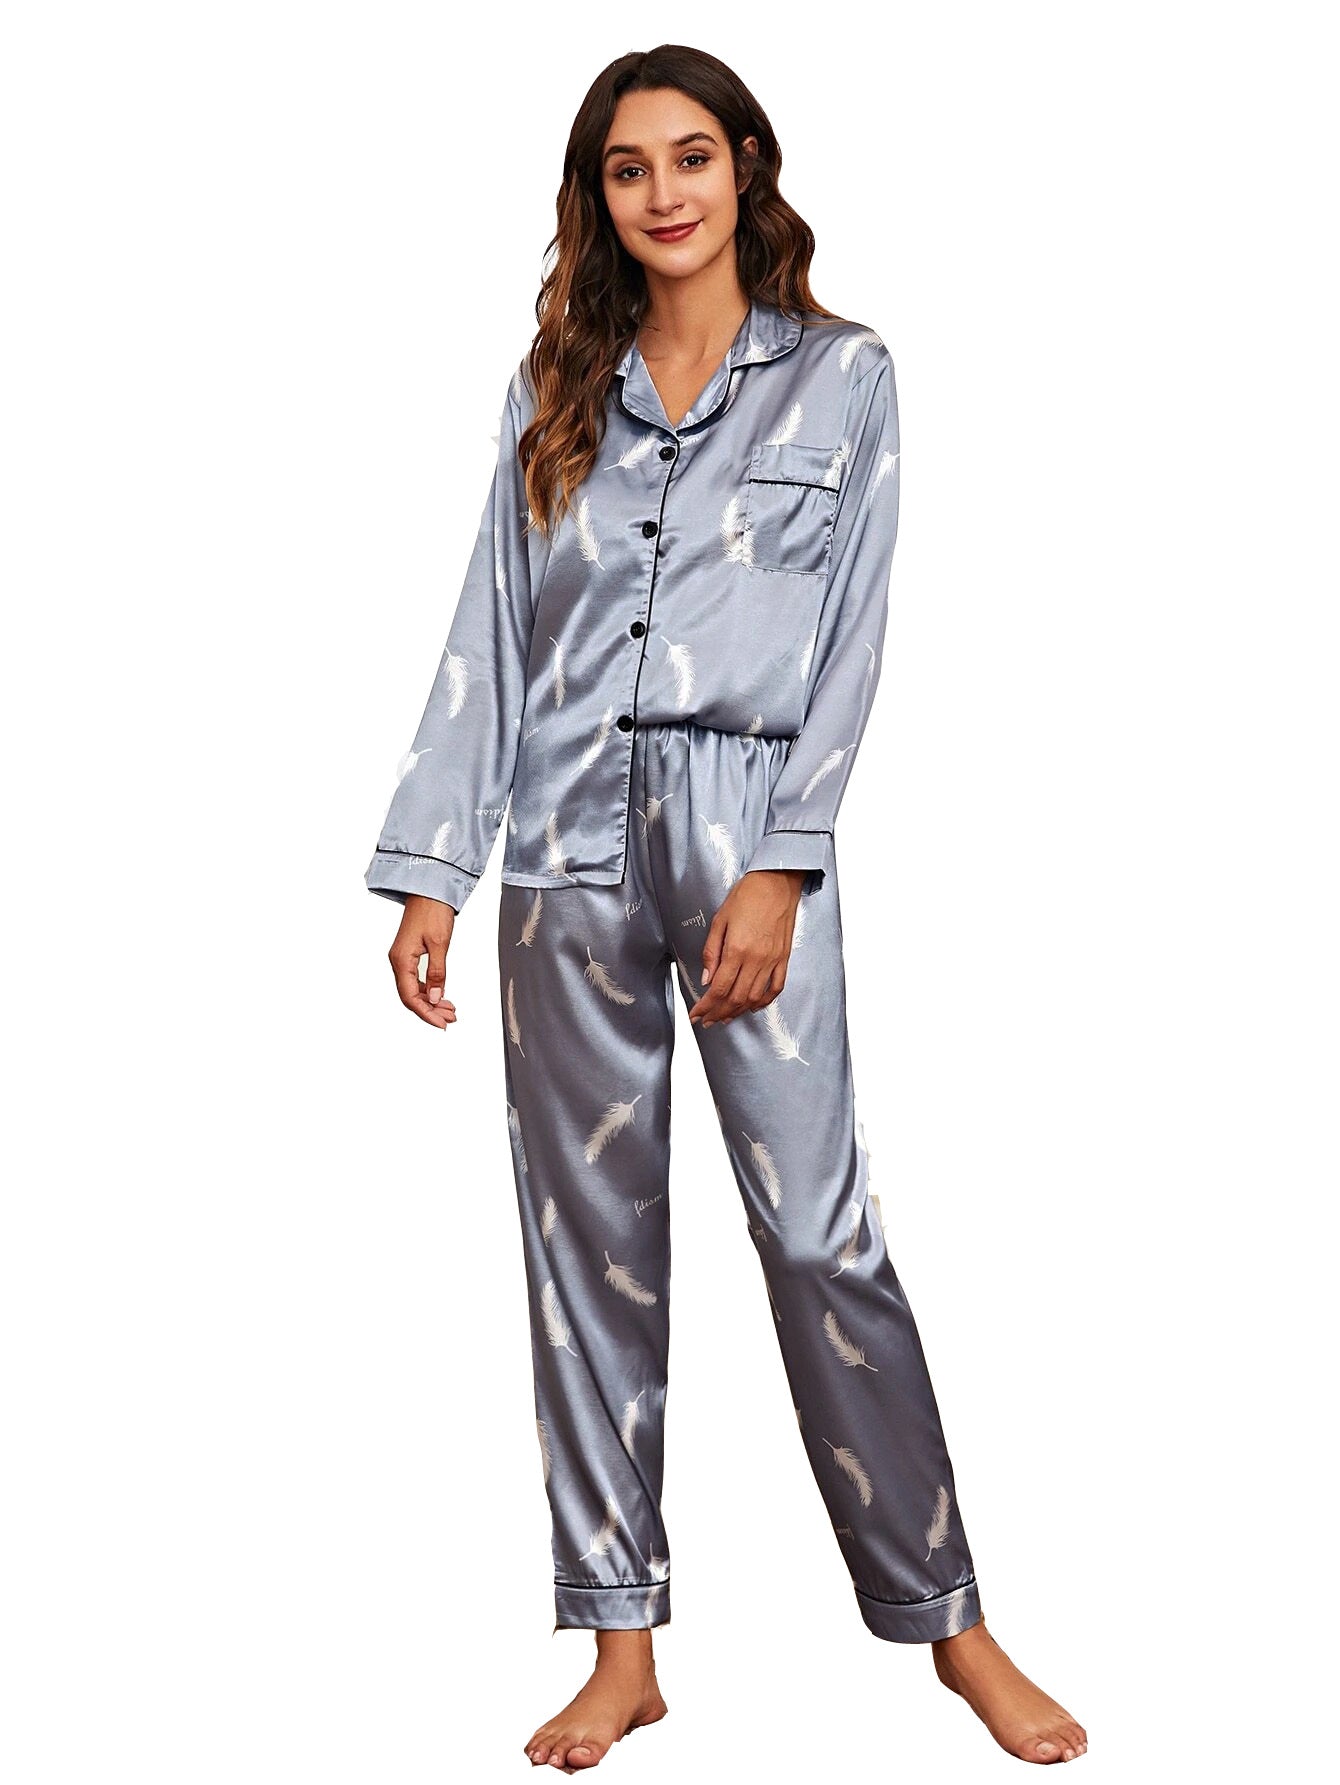 European And American Style Home Service Suit Pajamas Women